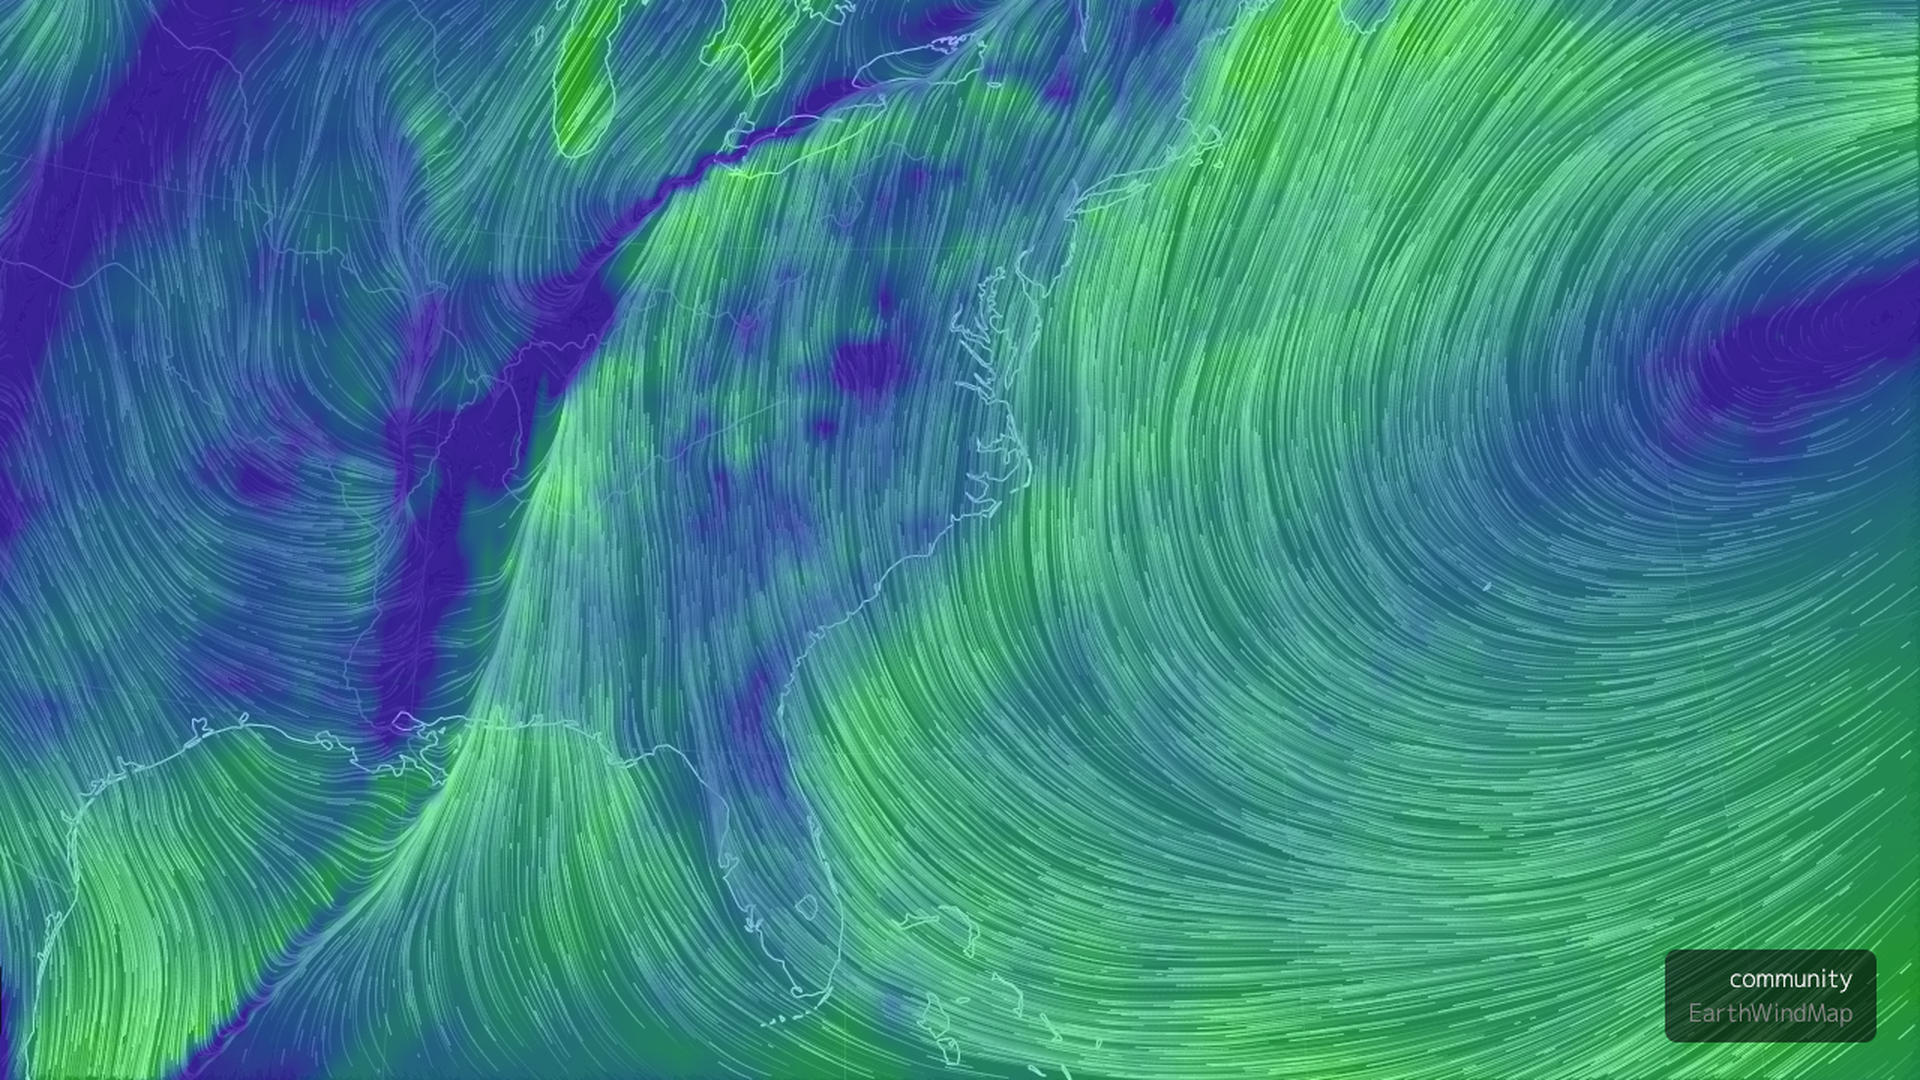 This image is a live weather illustration of the Southeast